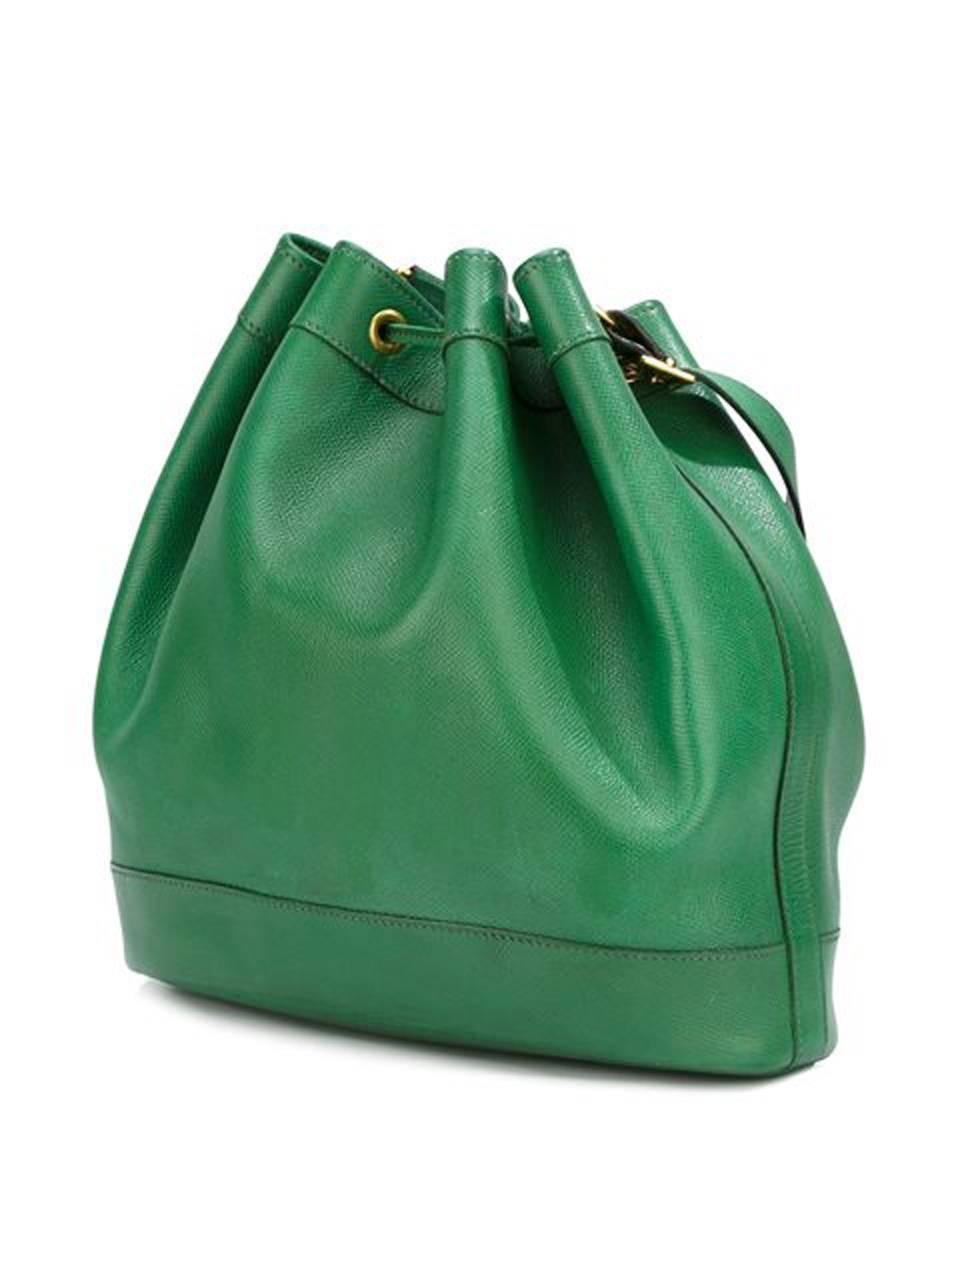 1990s green leather Hermès 'Market' shoulder bag featuring a bucket style, a pebbled leather texture, an adjustable shoulder strap, a drawstring fastening, a main internal compartment, plated gold hardware and an outside bottom gold tone logo